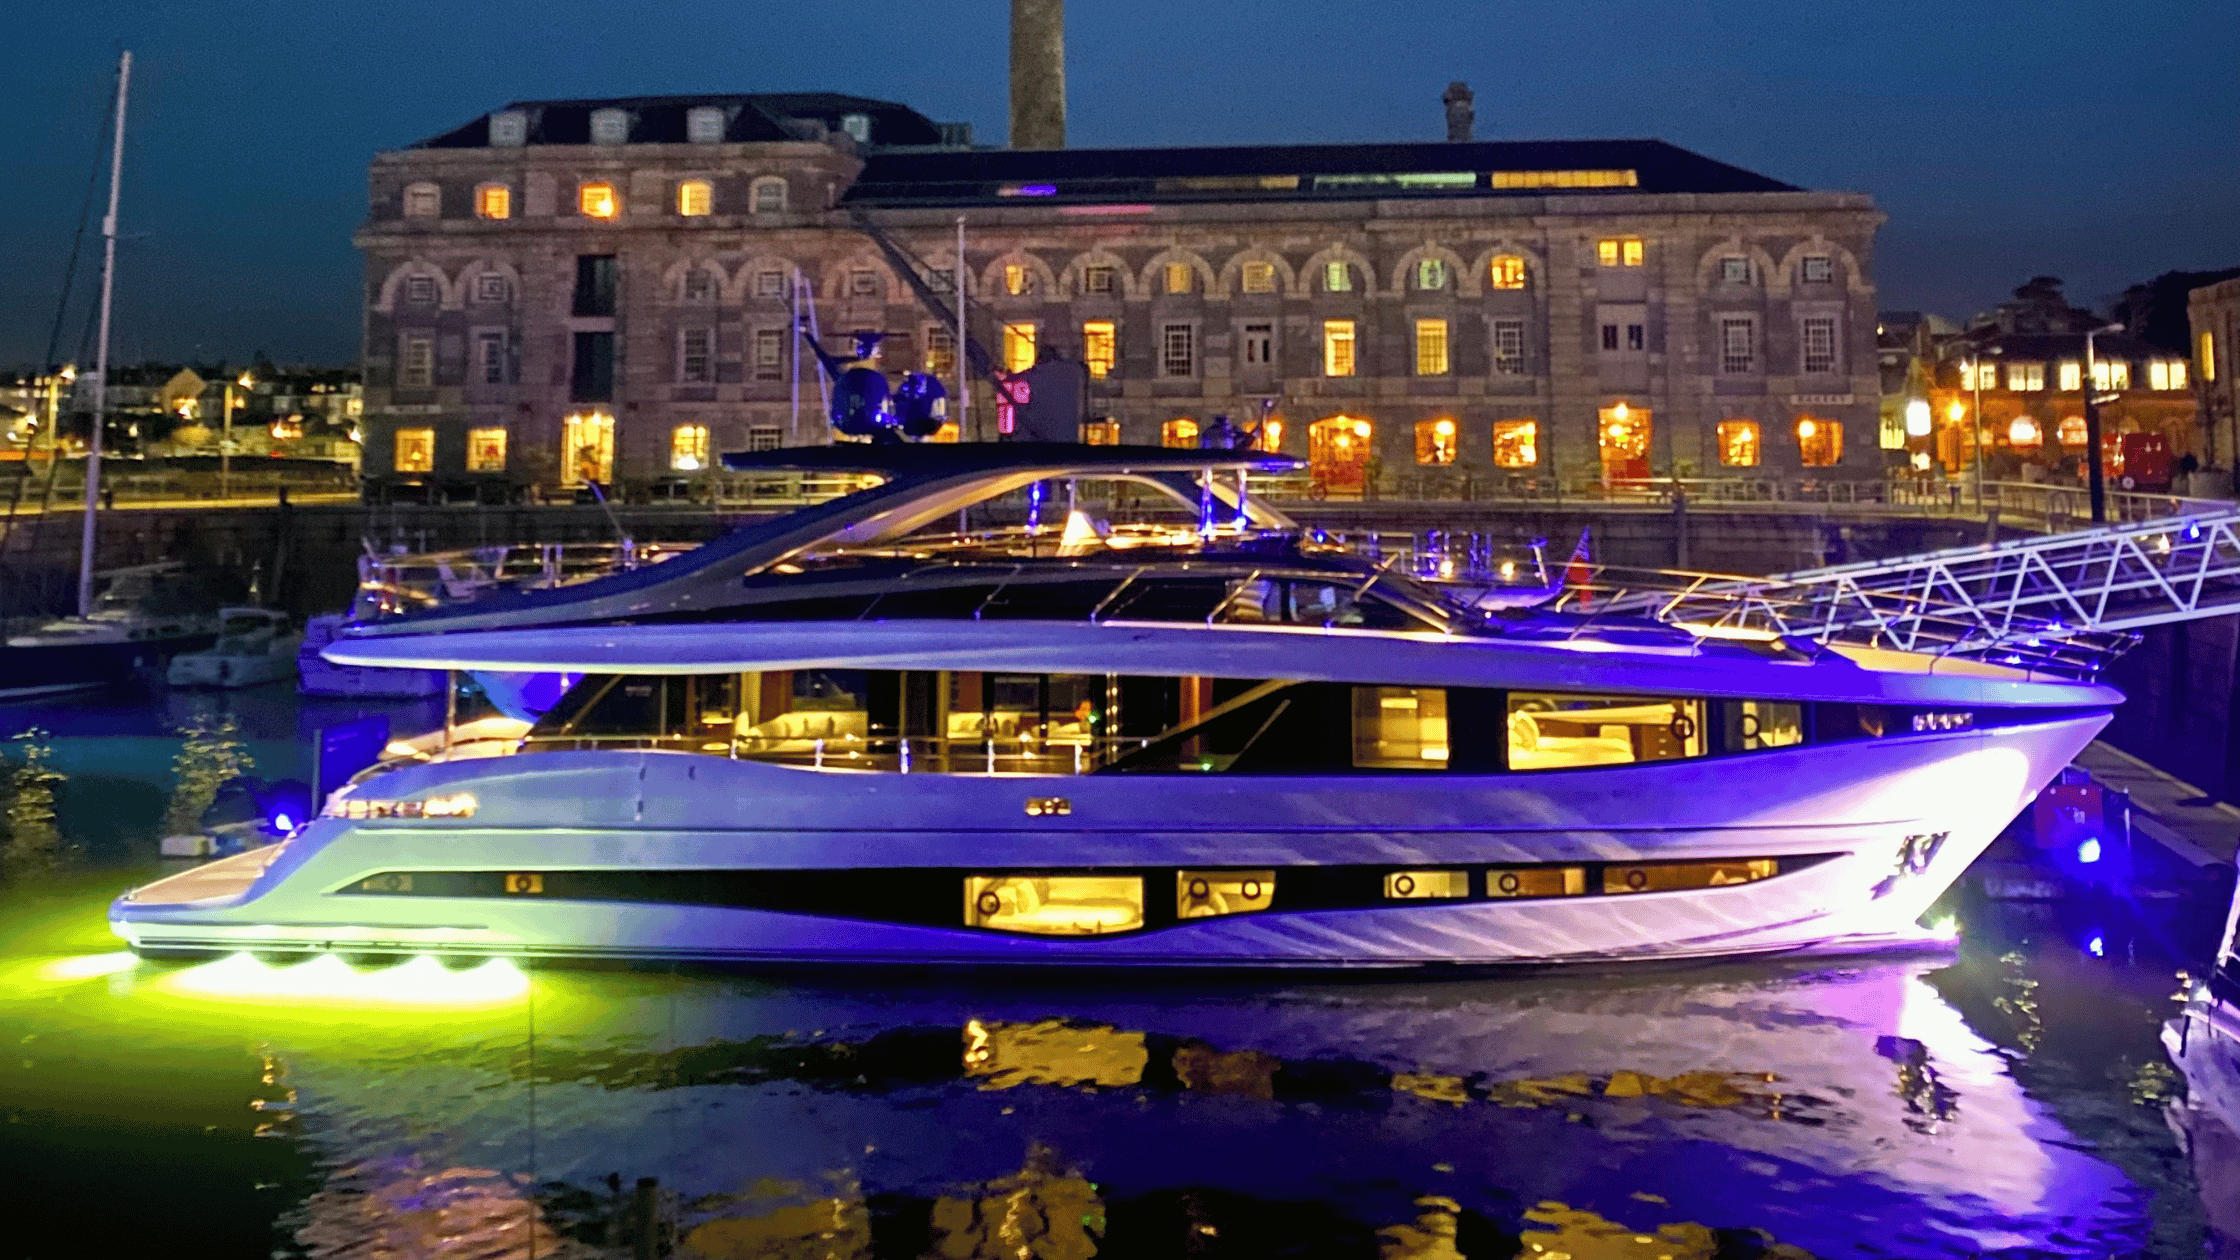 Y95 Princess with Lights on at a marina in England.